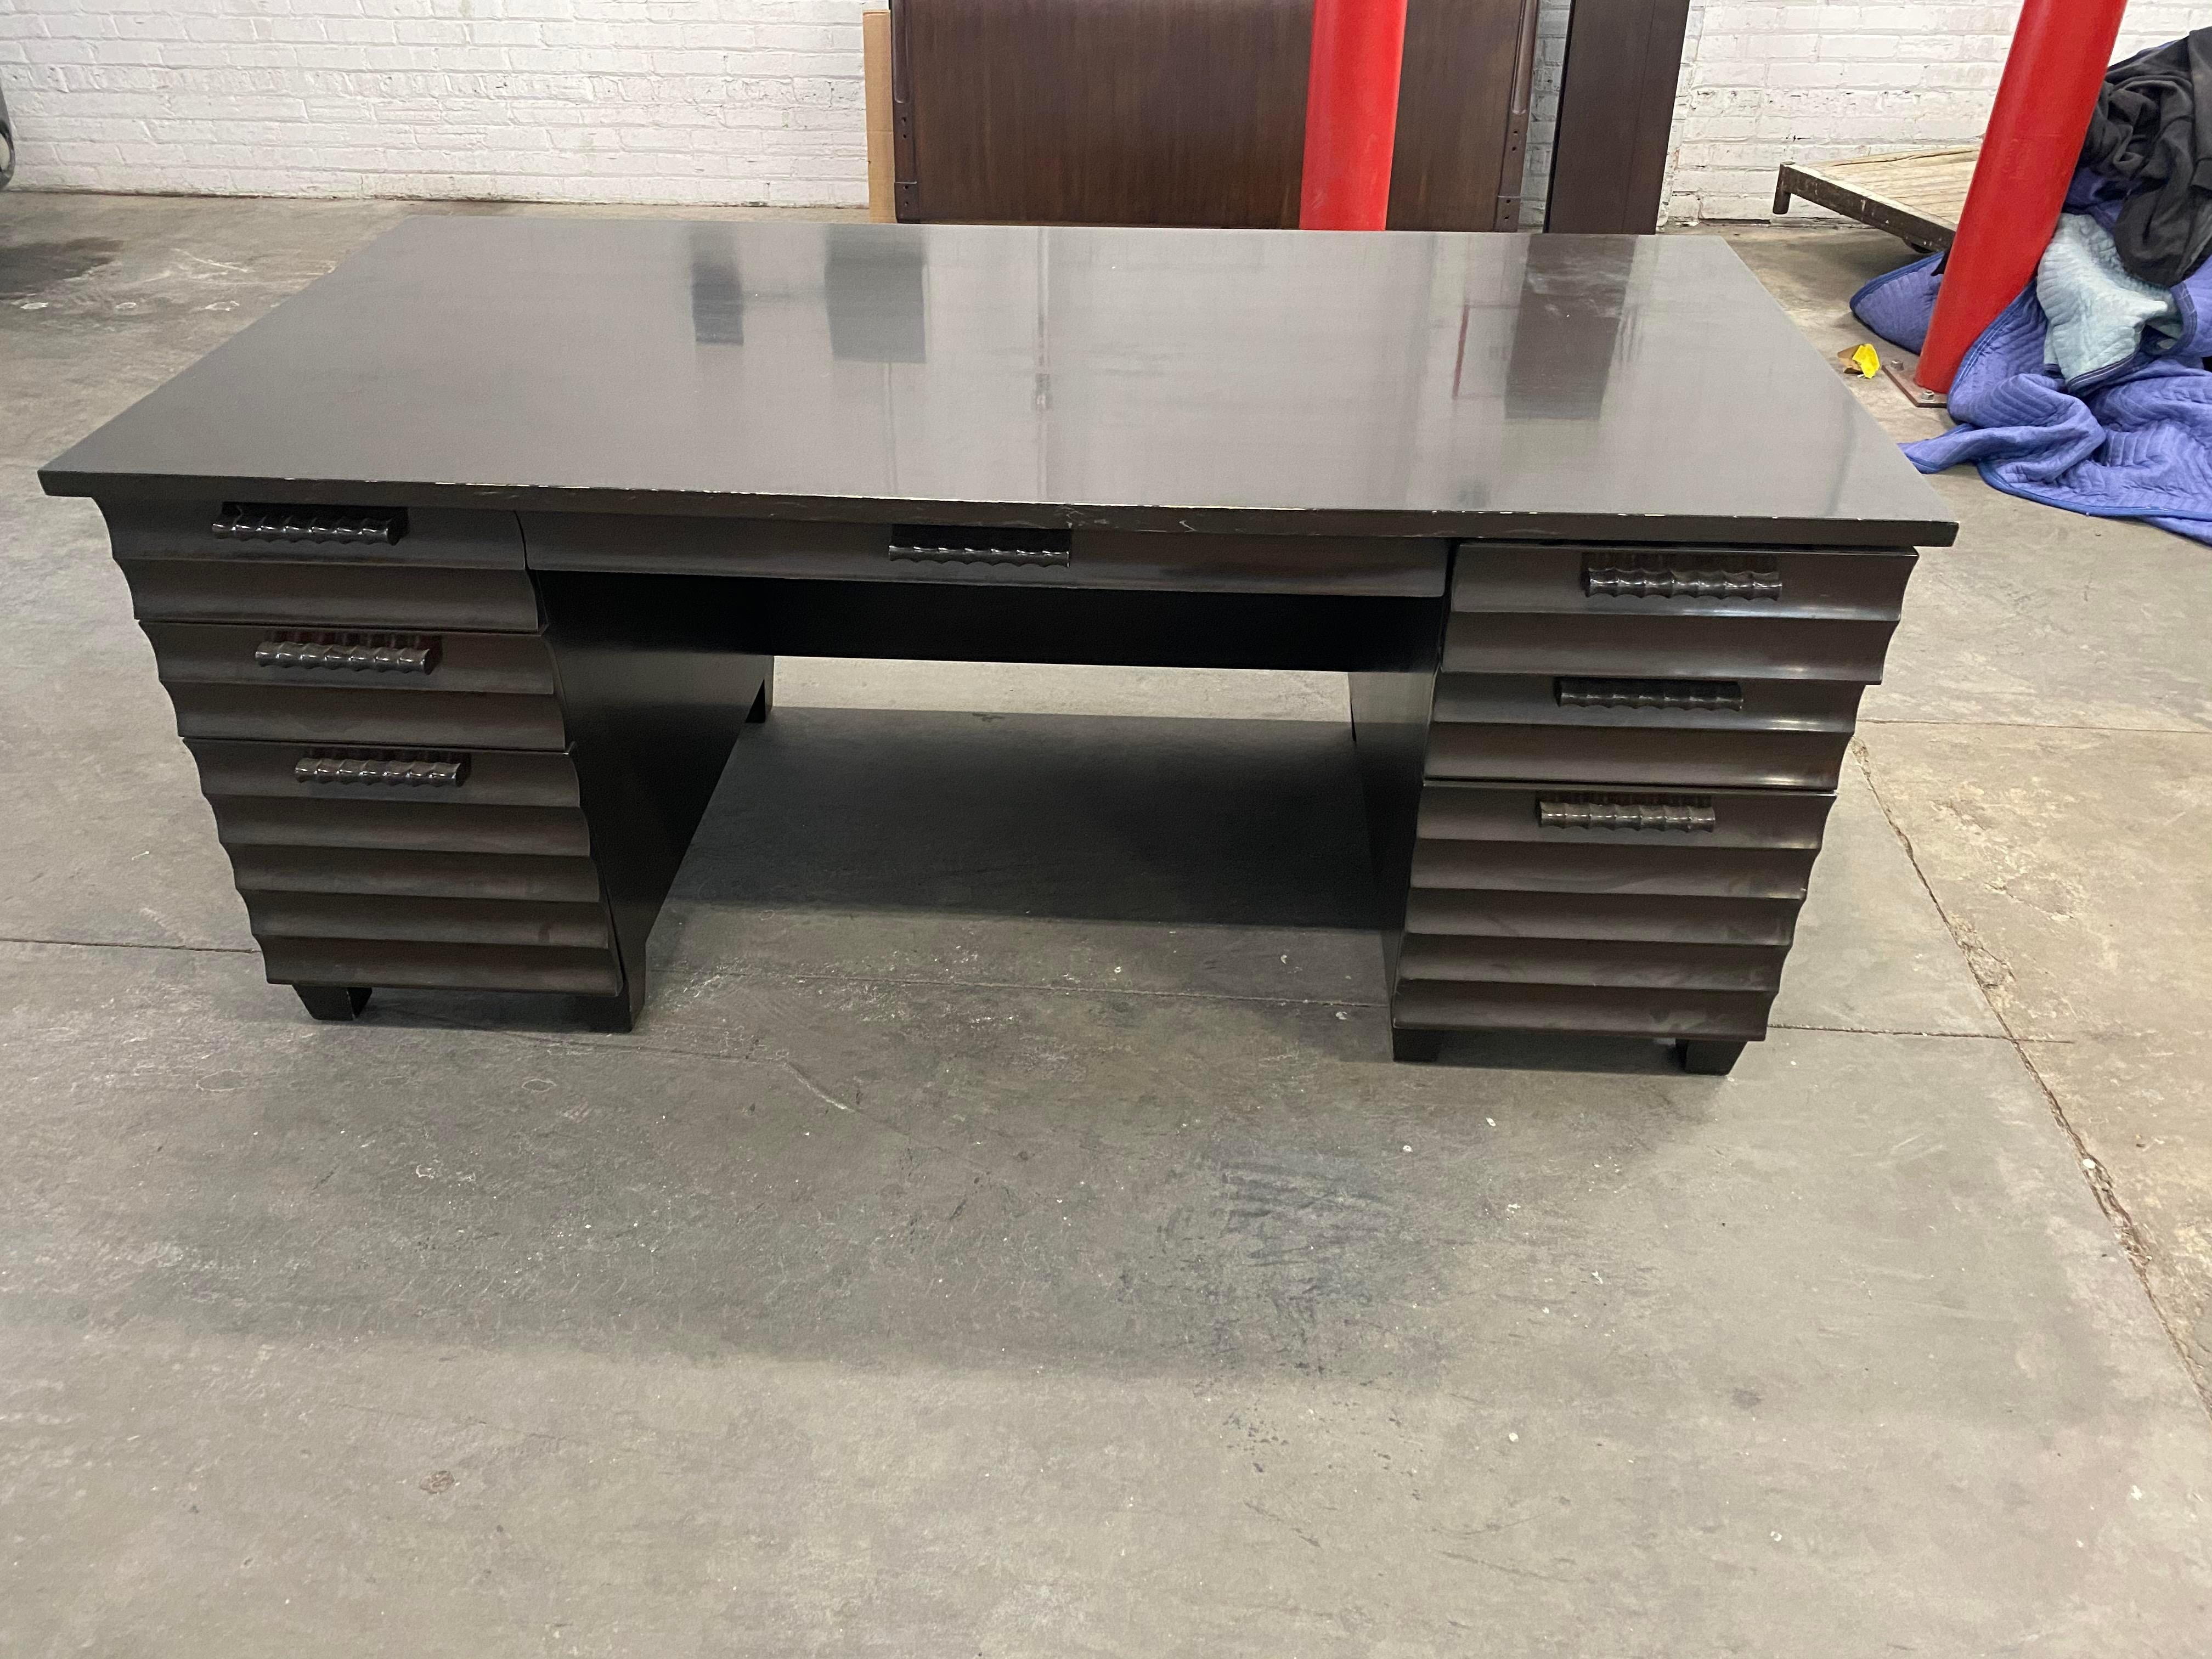 Nancy Corzine Wakefield executive desk in excellent condition
Piece comes fully restored free of dents and scratches.